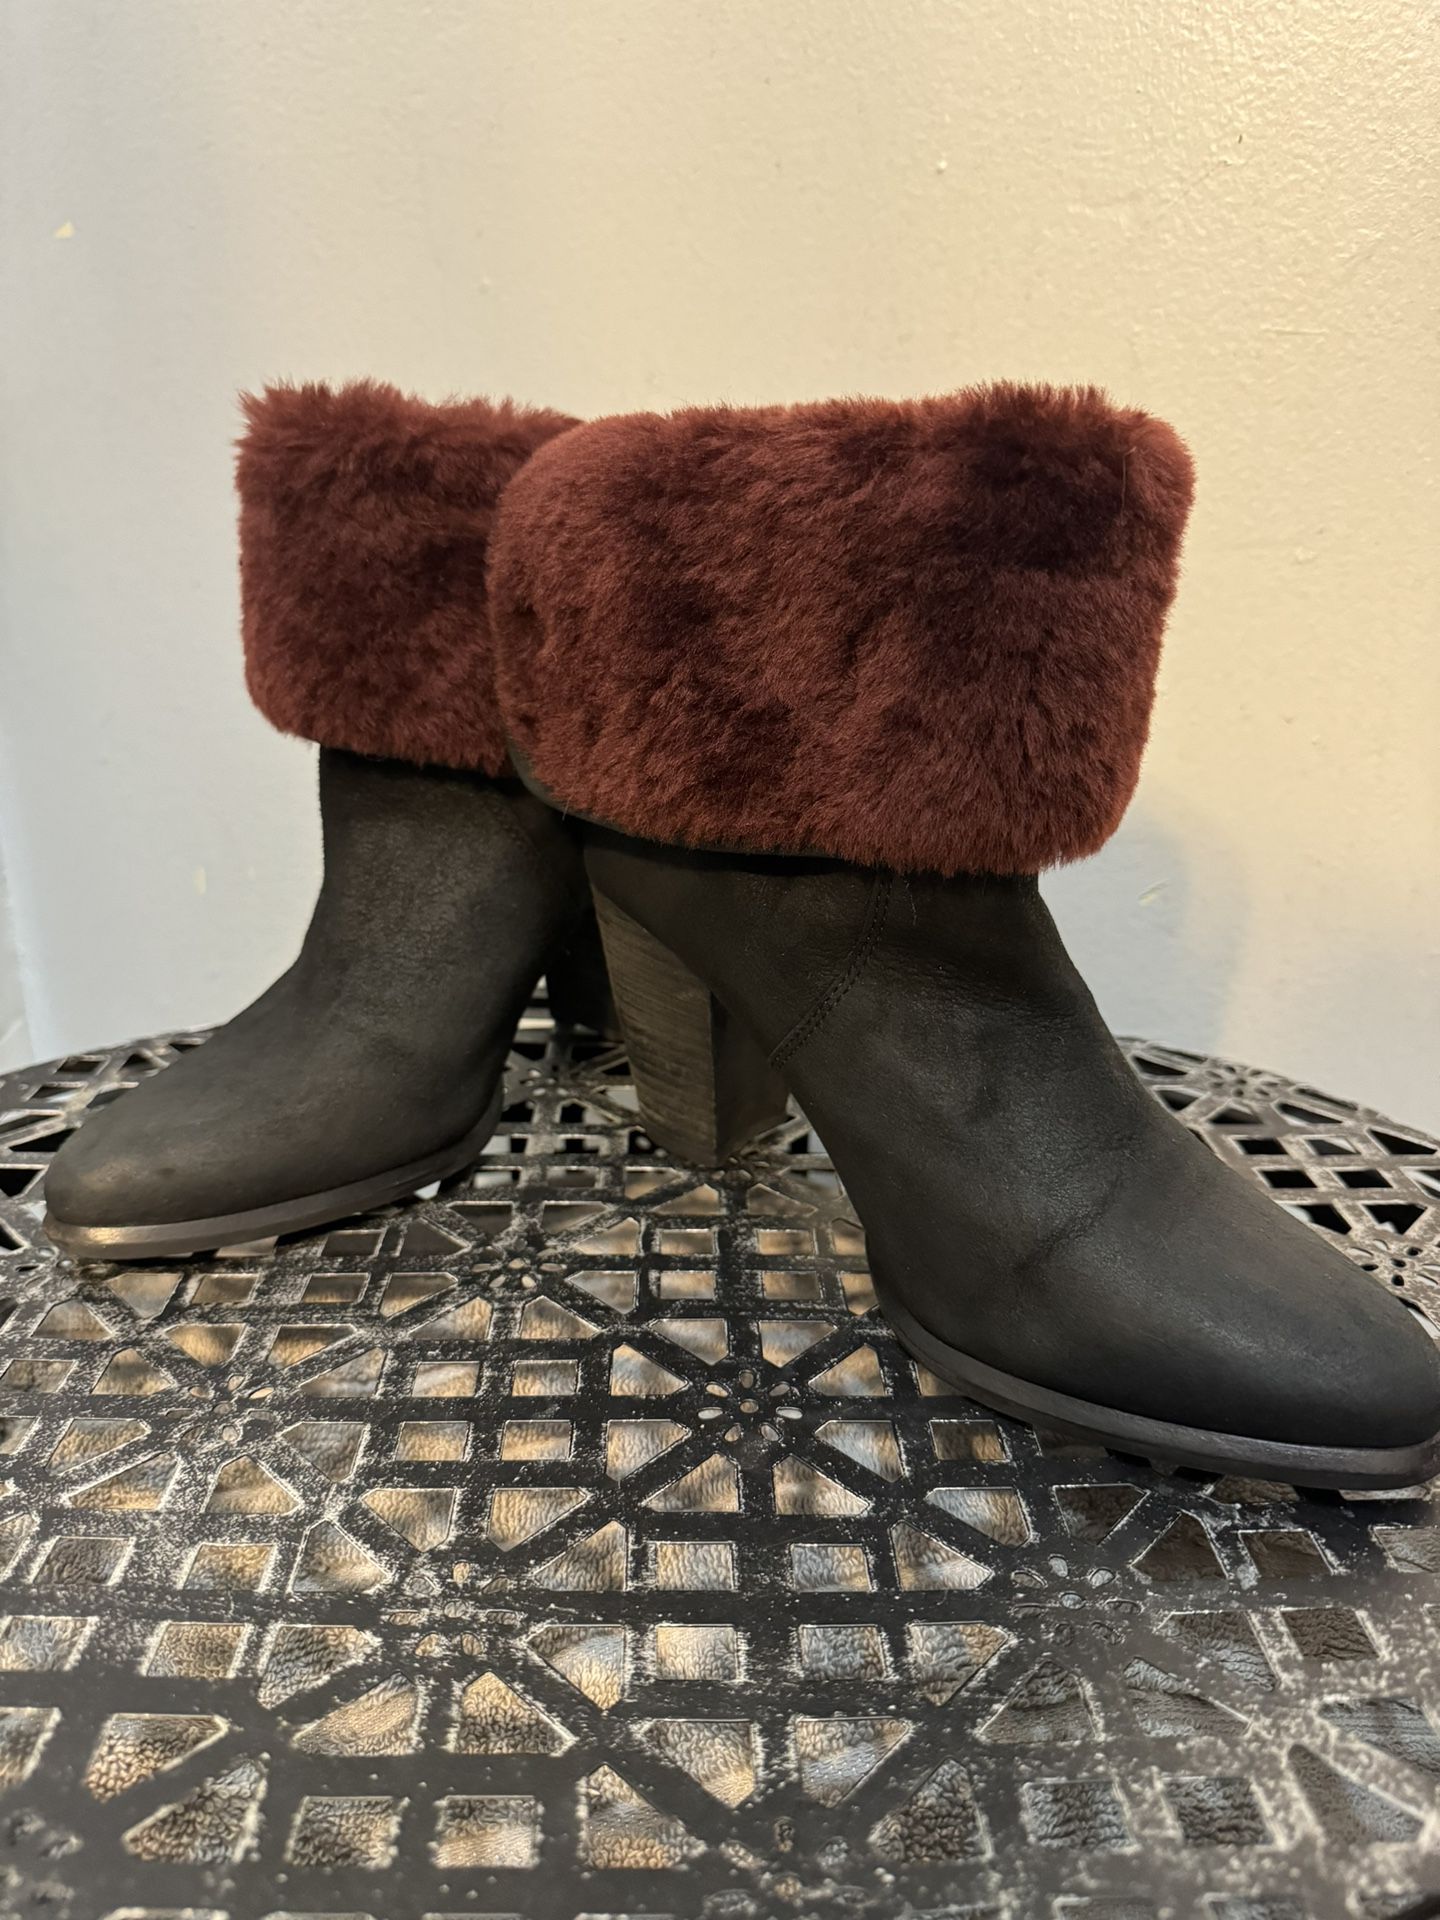 Ugg Shearling lined Black boots 7.5/8